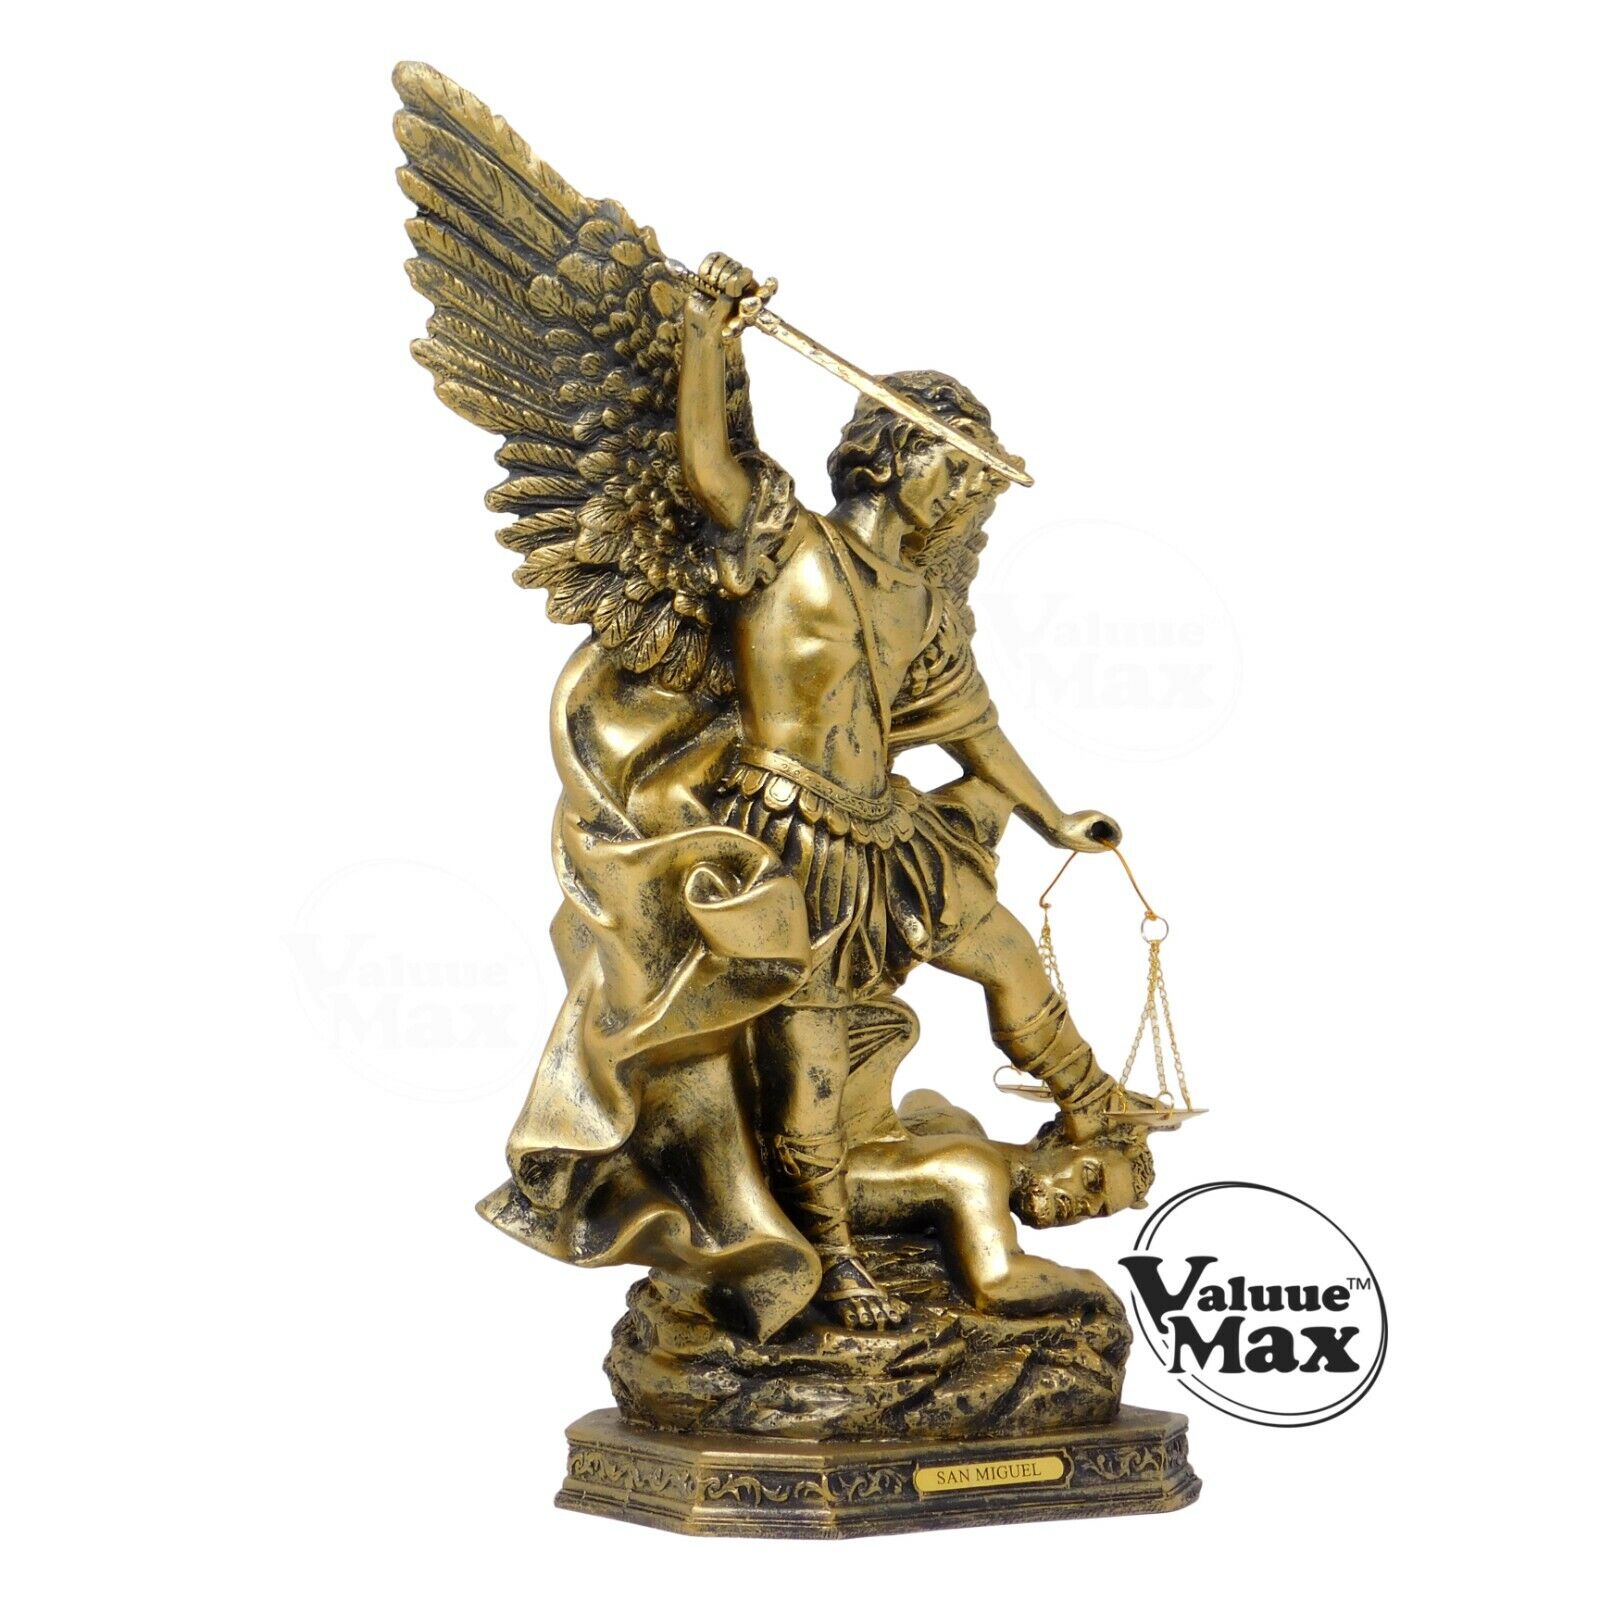 ValuueMax™ Saint Michael Archangel Statue, Finely Detailed Resin, 13 Inch Tall  